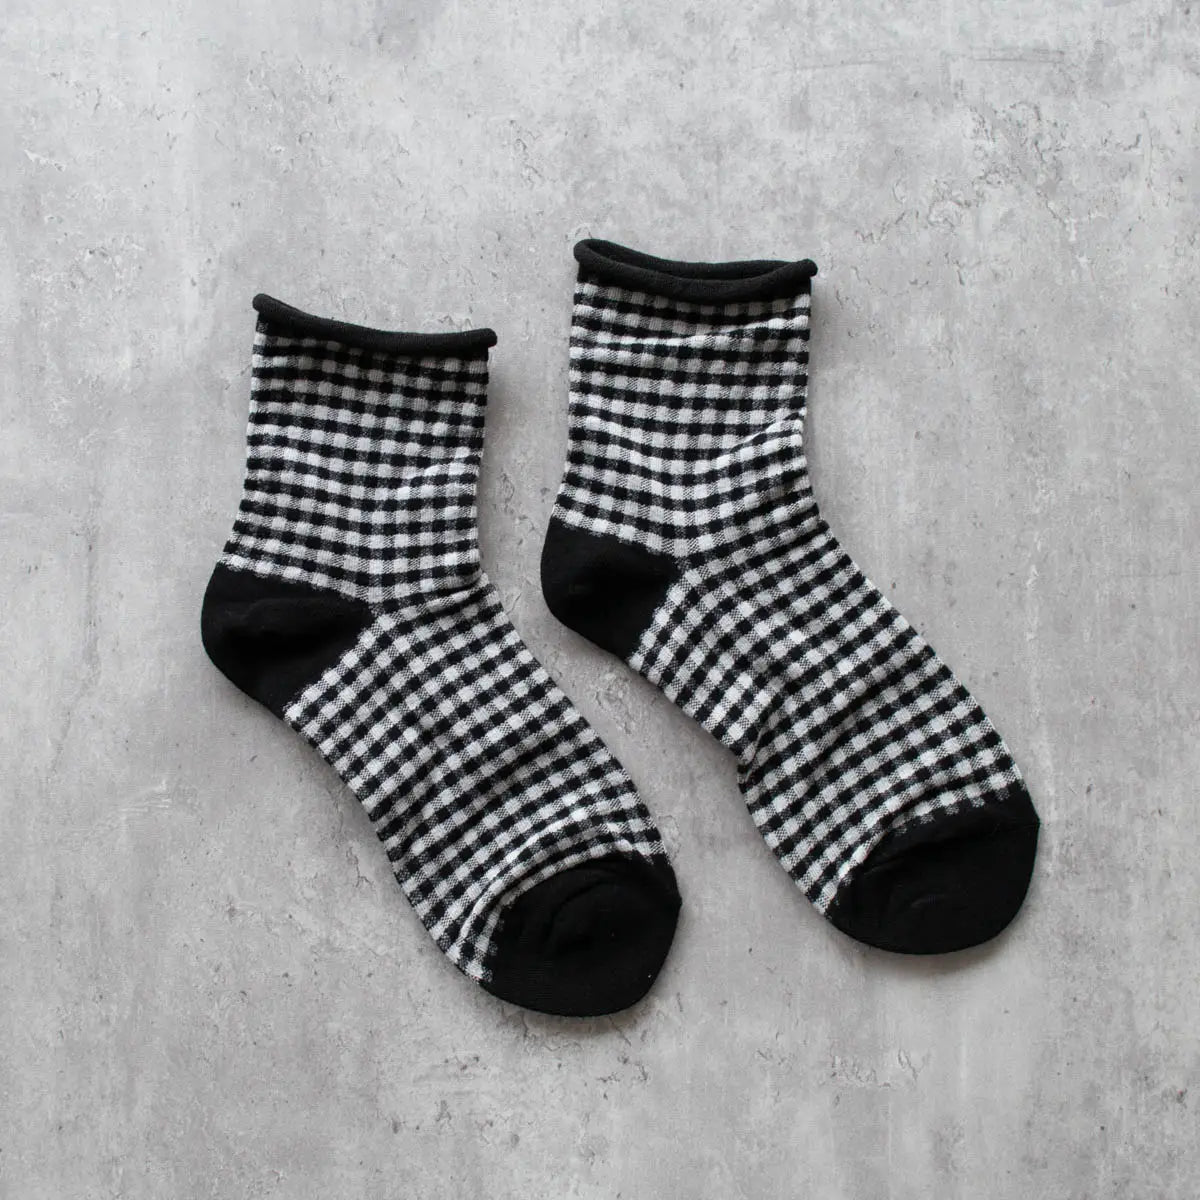 cotton knit socks in a black and white knit-in gingham pattern